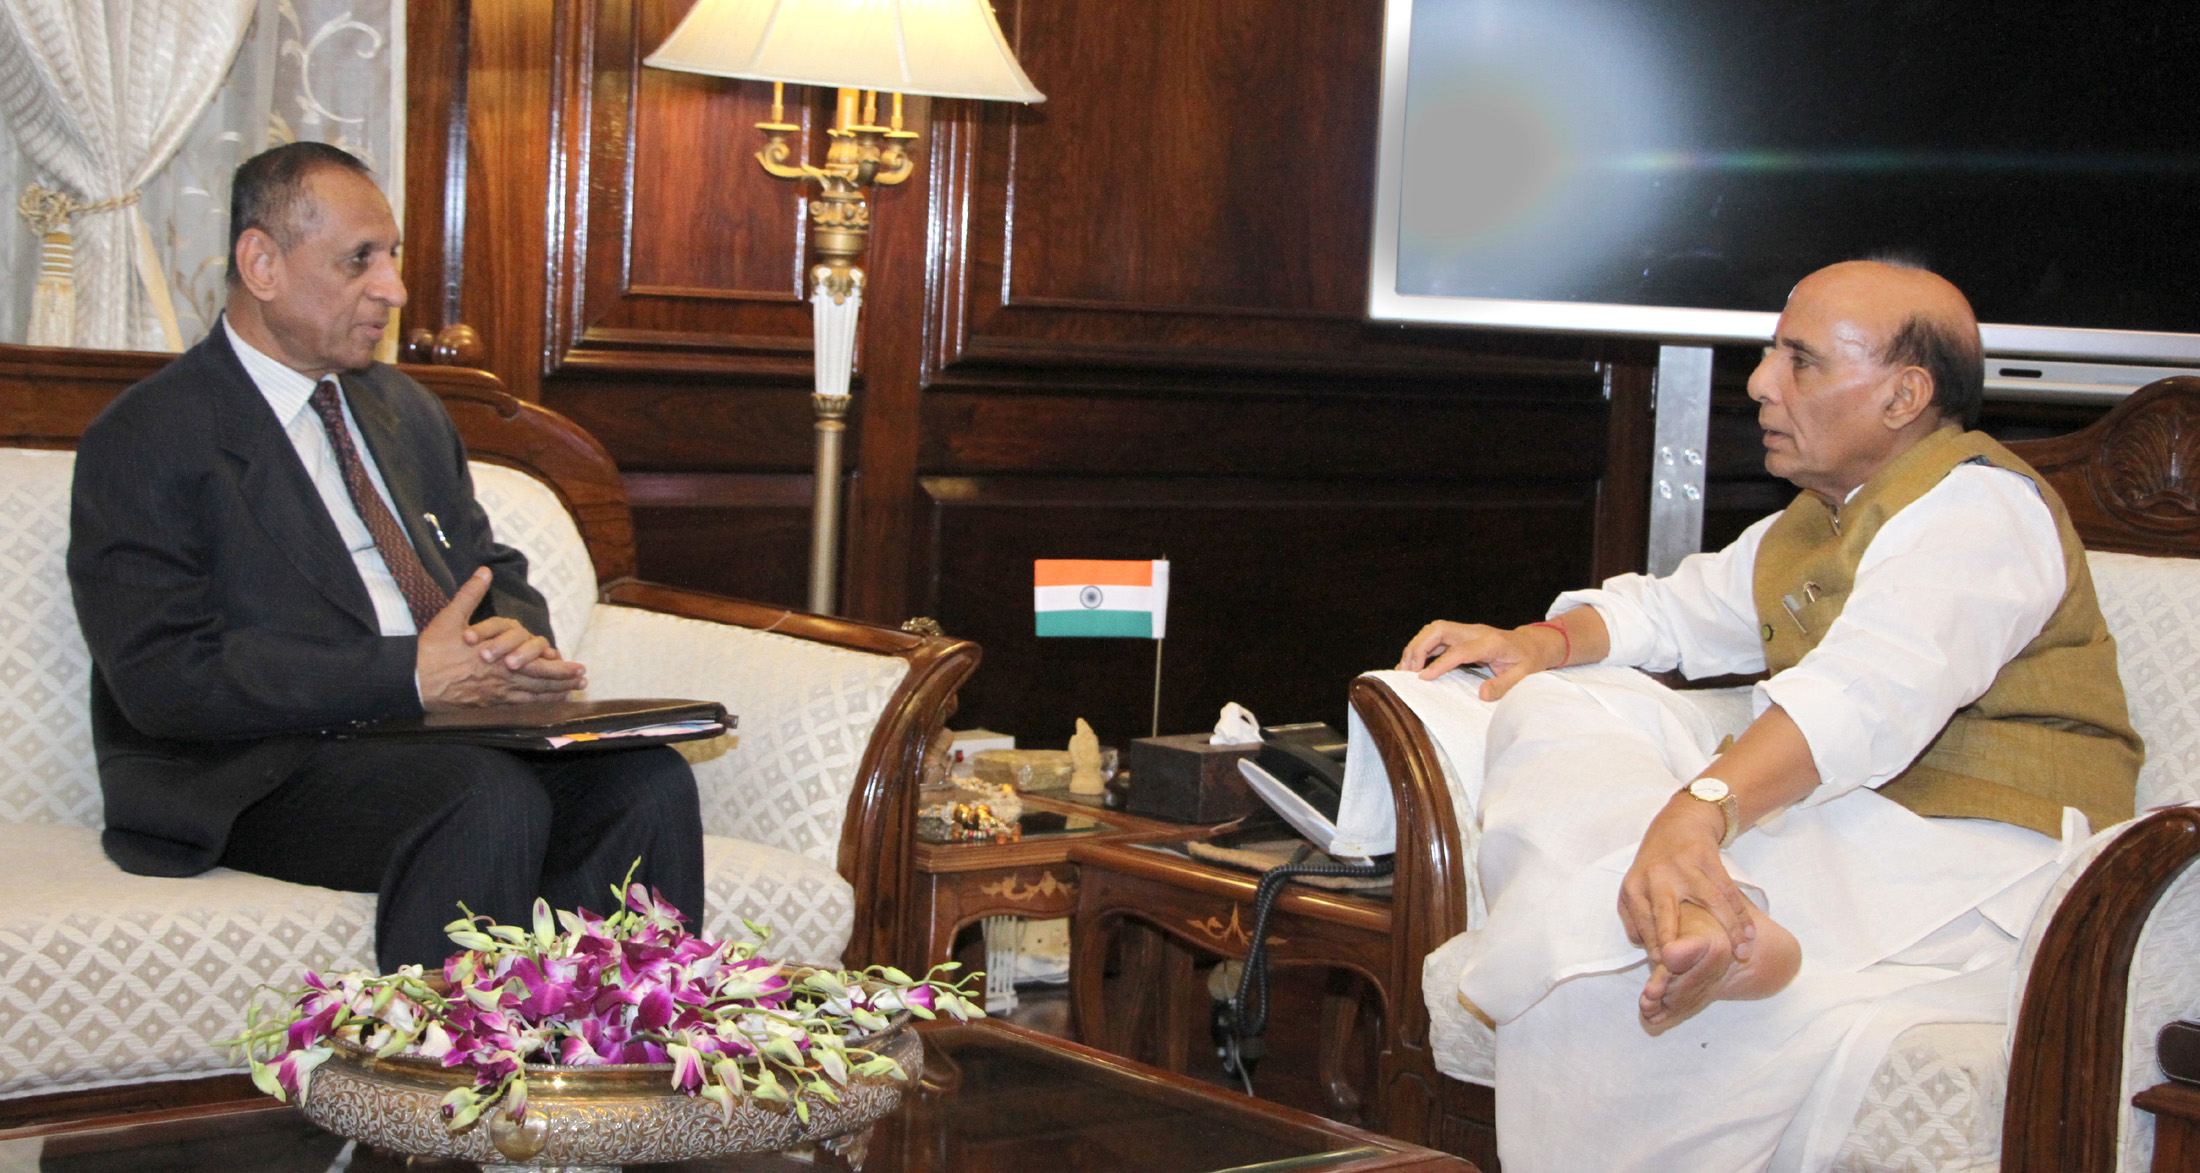 The Governor of Andhra Pradesh and Telangana, Shri E.S.L. Narasimhan calling on the Union Home Minister, Shri Rajnath Singh, in New Delhi on May 18, 2017.